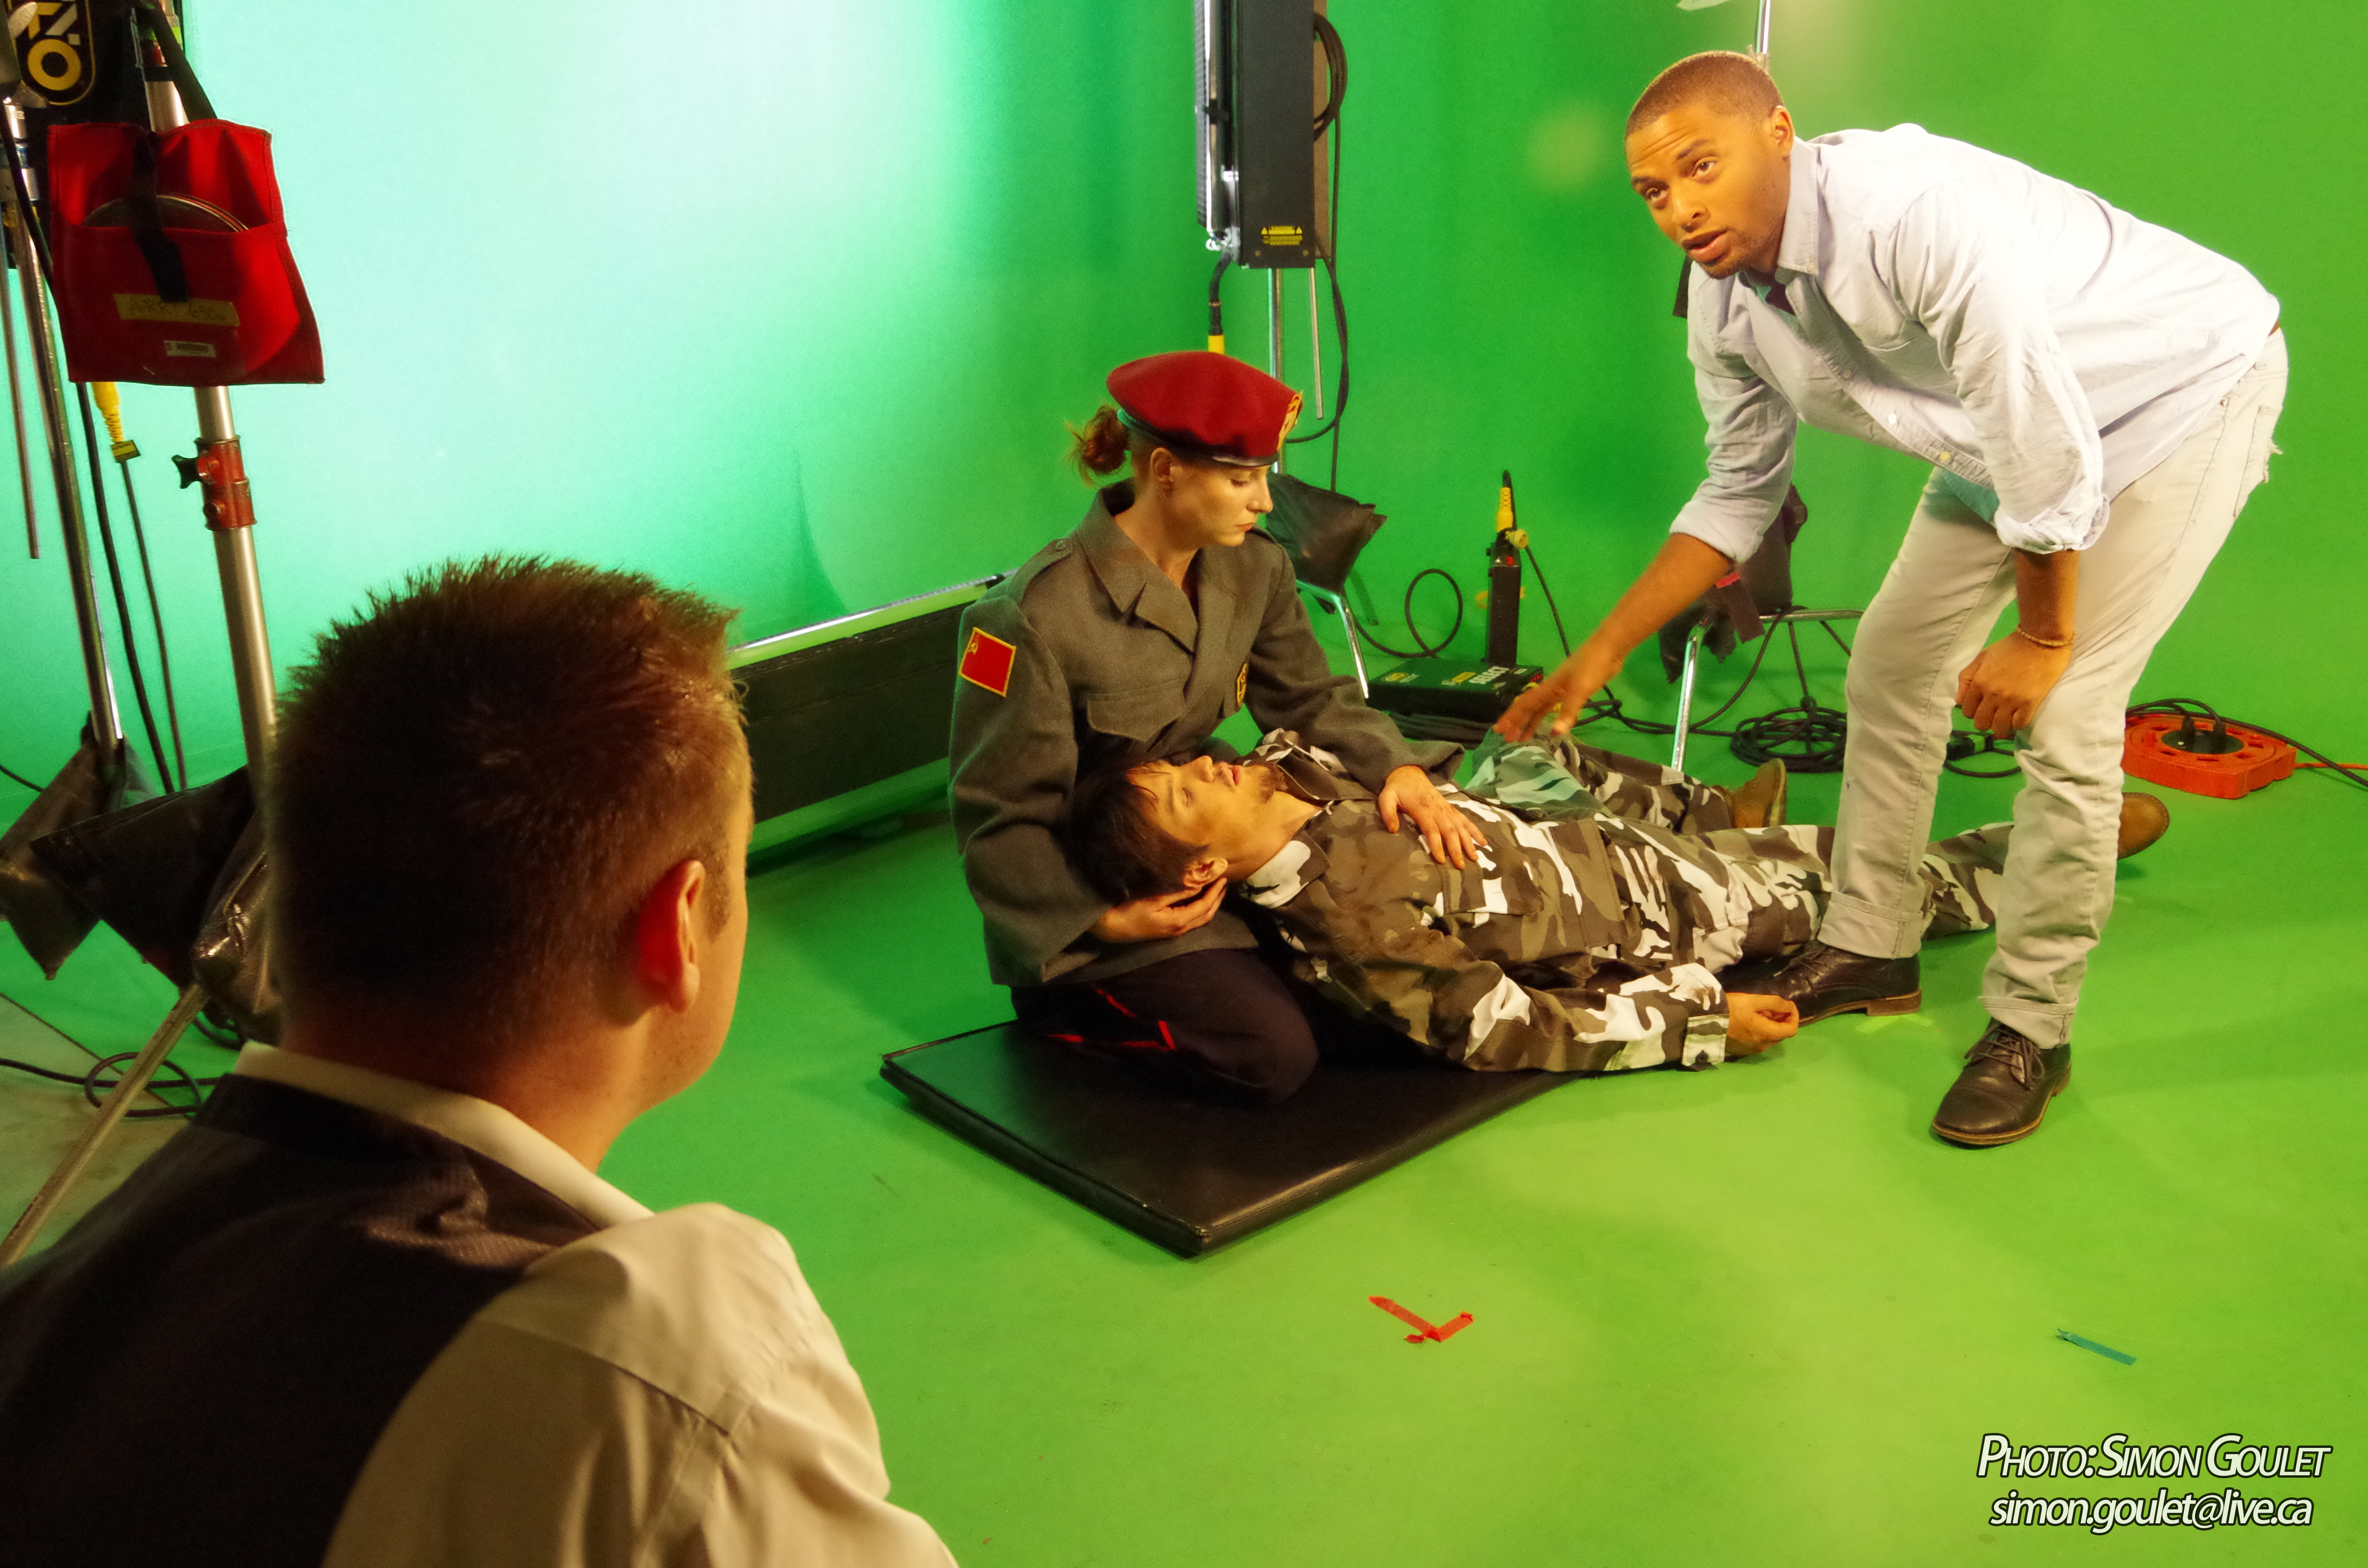 On set of my final project for VFS Triangle. Shot entirely on green screen I had to work closely with my VFX supervisor and make sure things flowed smoothly.